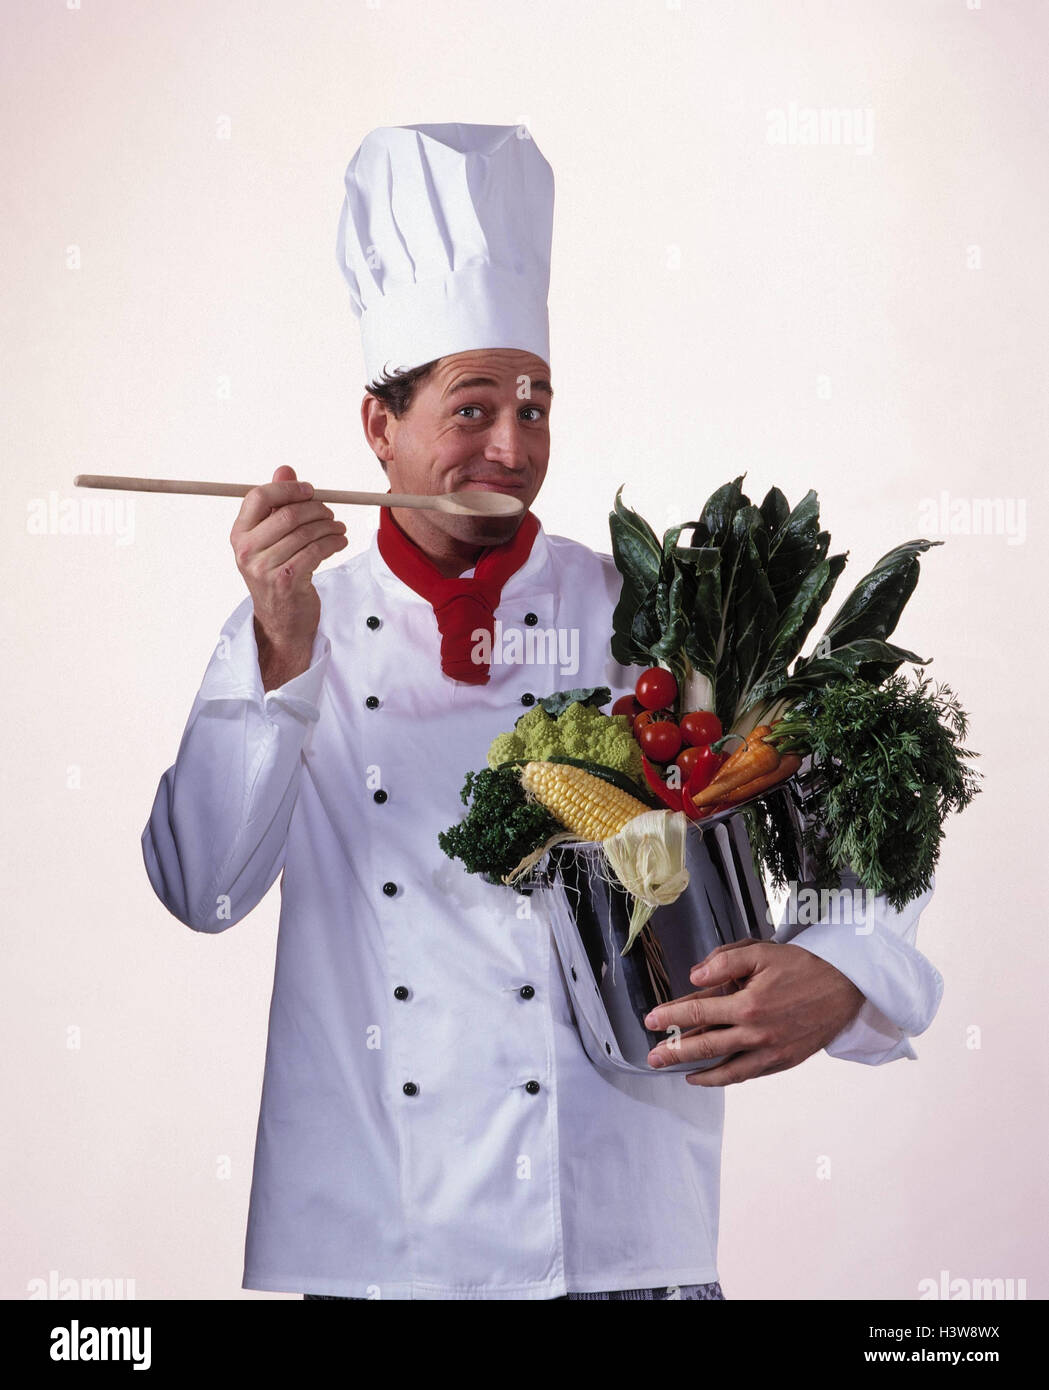 Cook, pot, vegetables, wooden spoon, gesture, half portrait, man, working clothes, occupation, gastronomy, try, ingredients, studio, cut out Stock Photo